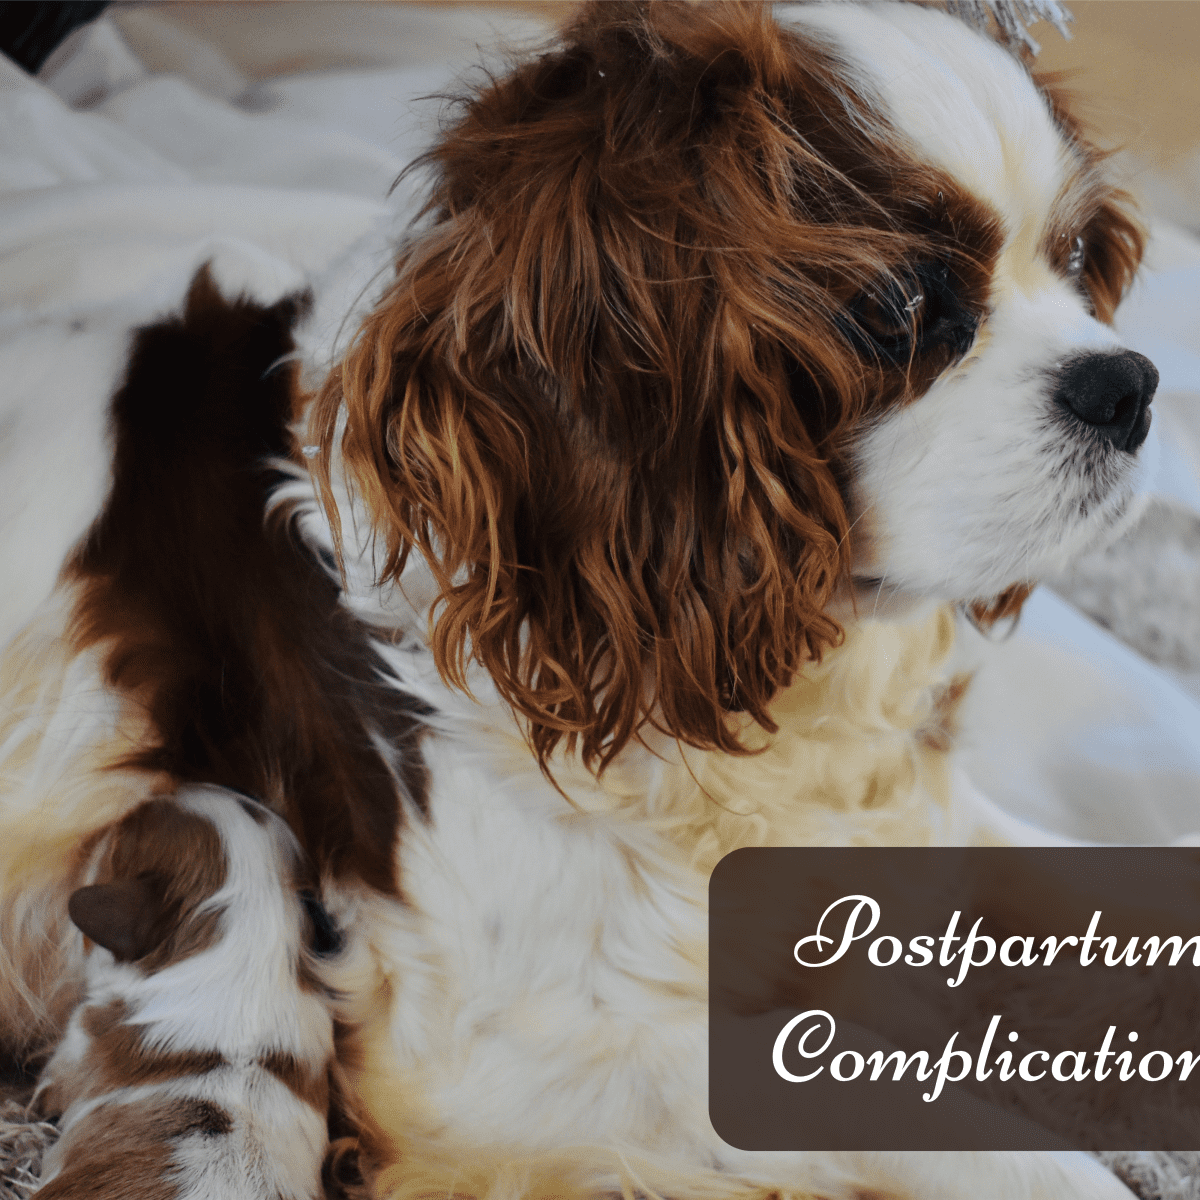 Dog Health: Common Complications in Dogs After Giving Birth - PetHelpful